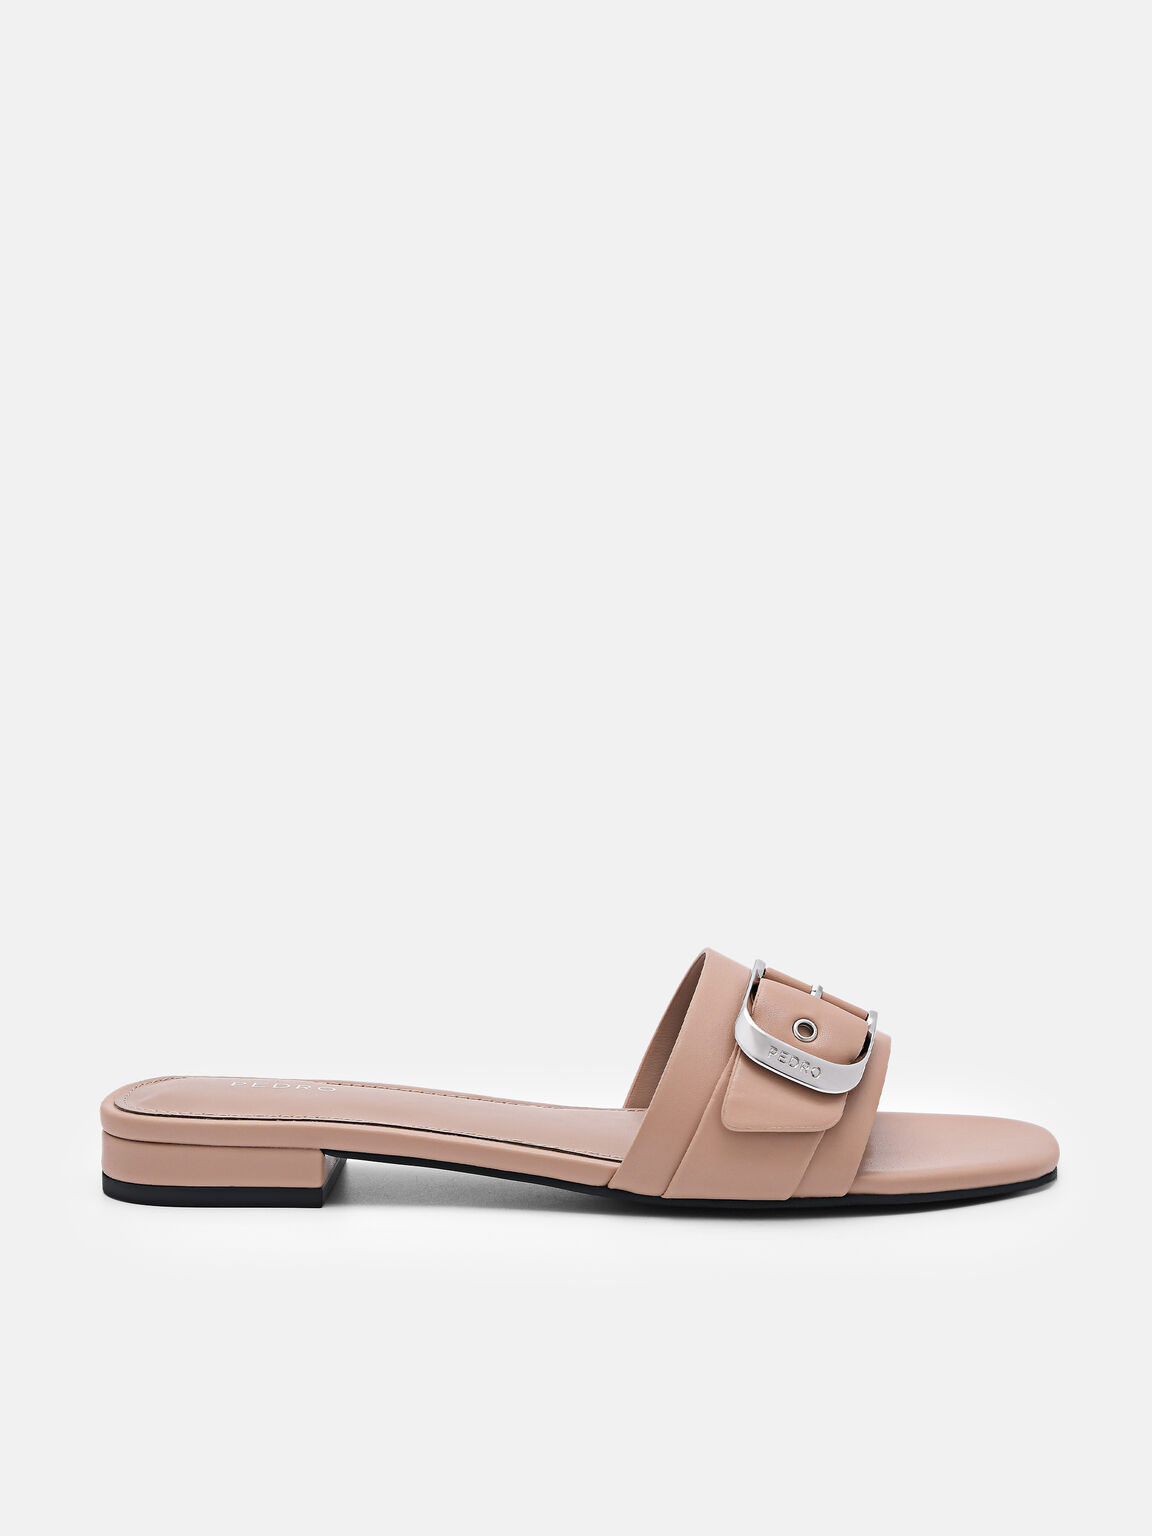 Helix Buckle Sandals, Taupe, hi-res